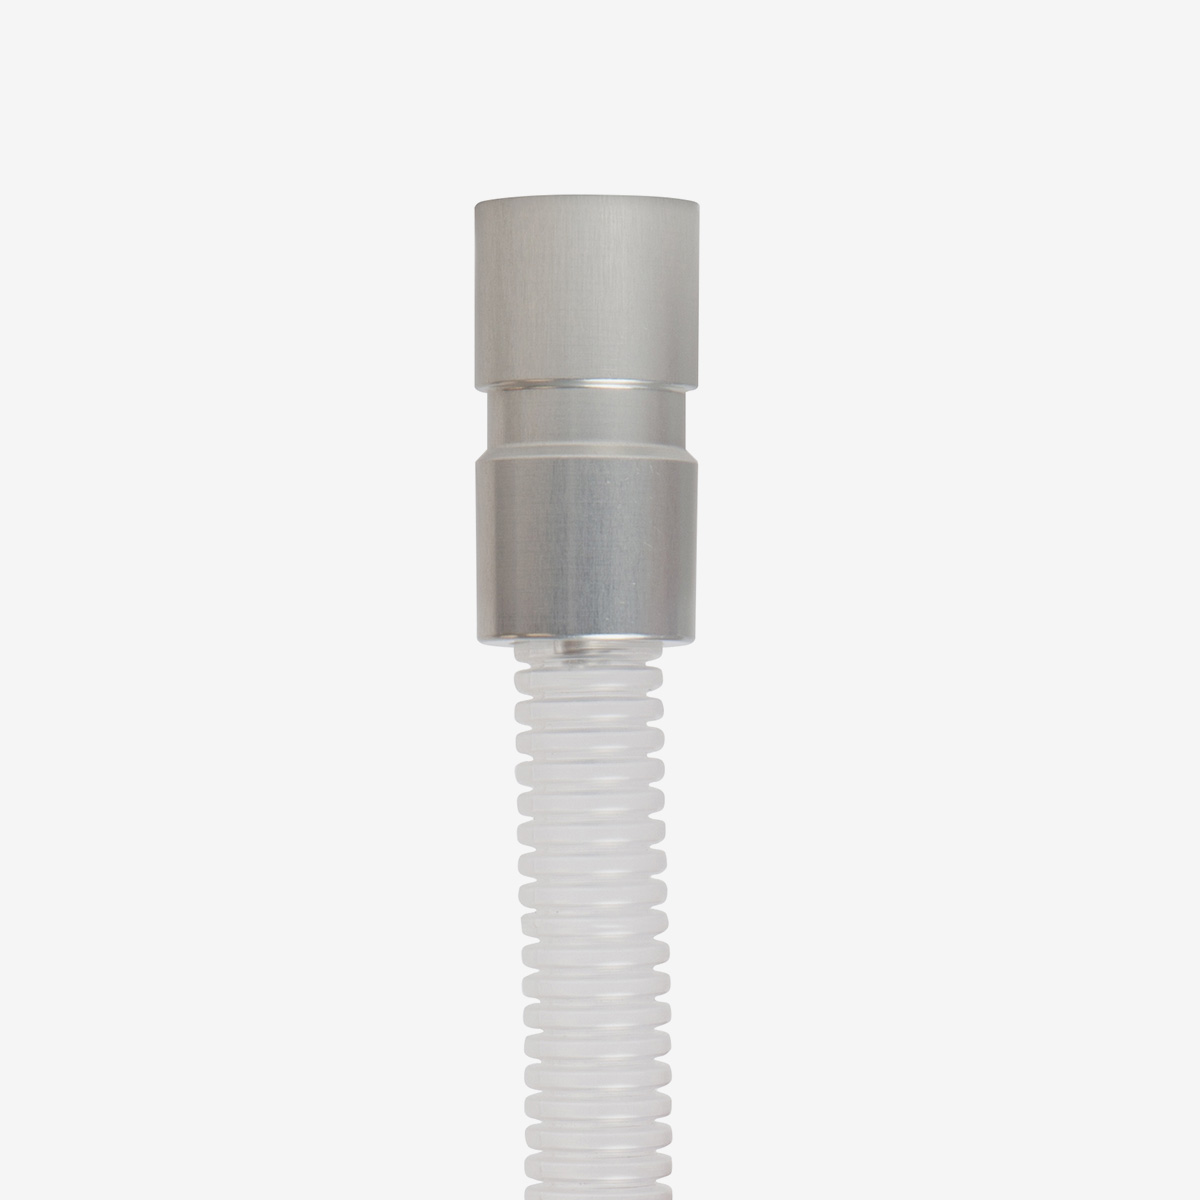 Vertical grey 3-in-1 muffled adapter connected to translucent hose on white background